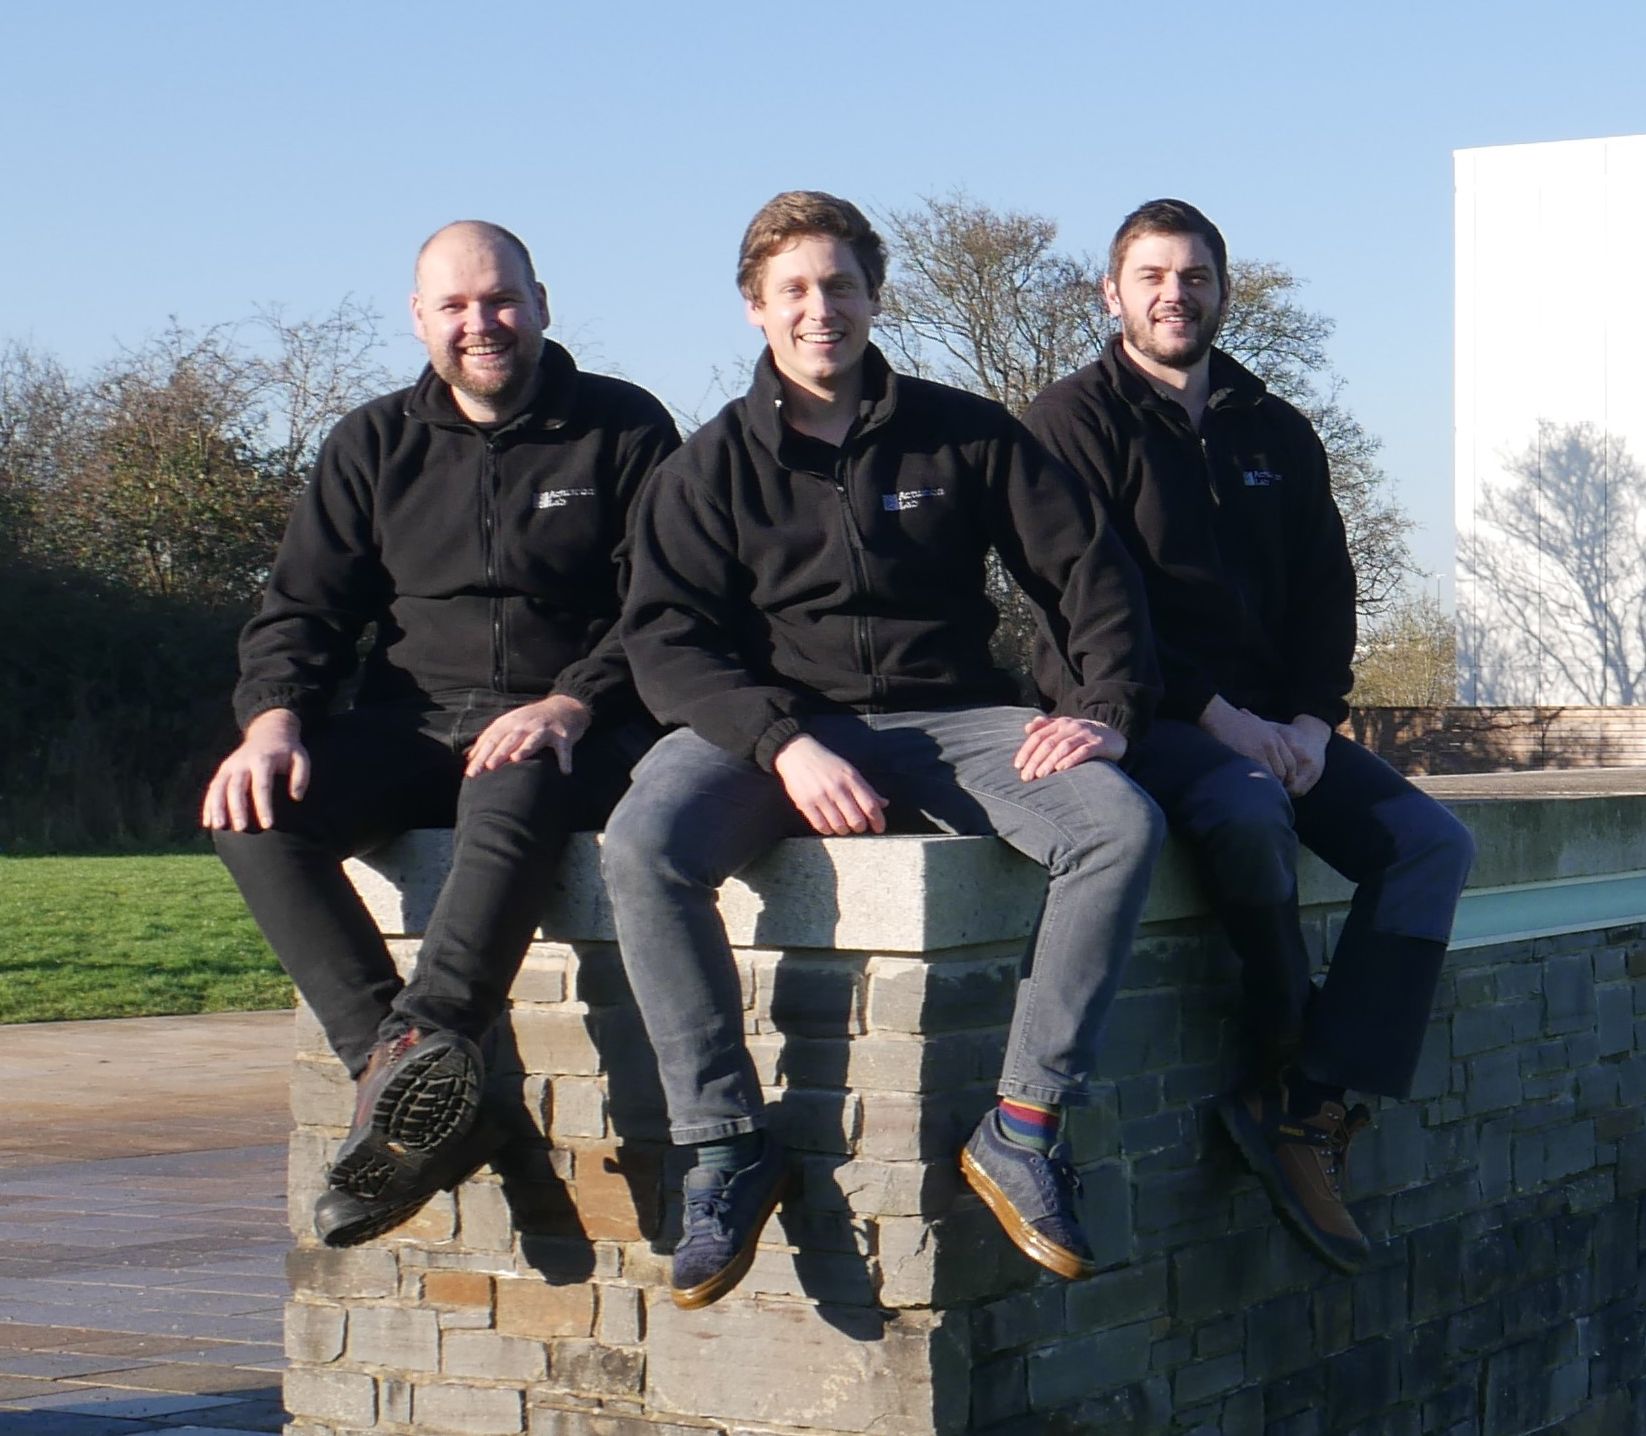 The company founders: Michael Dicker (CTO), Simon Bates (CEO) and Tom Llewellyn-Jones (Head of R&D)